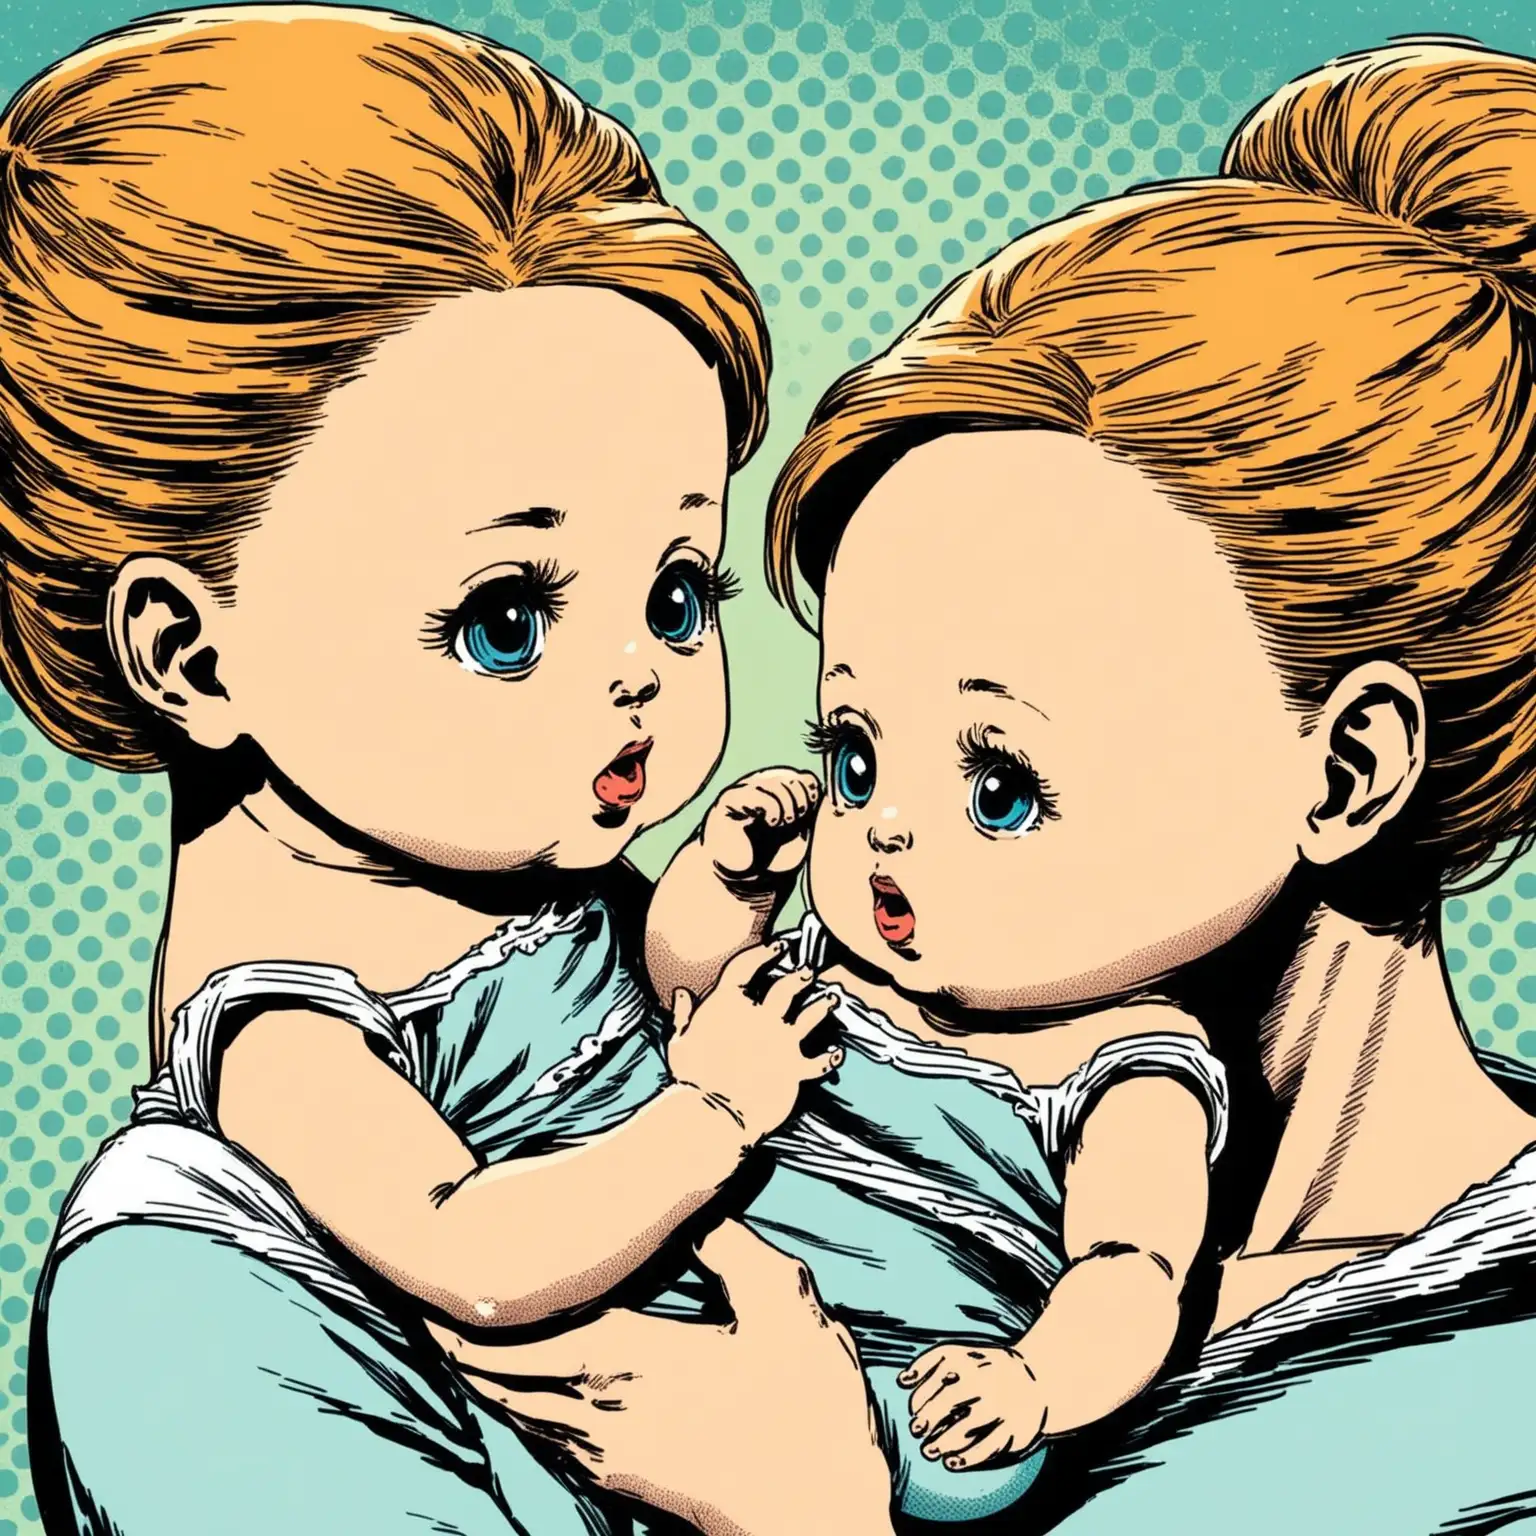 Comic book style: High angle of a woman holding two twin babies.  We don't see her face.
